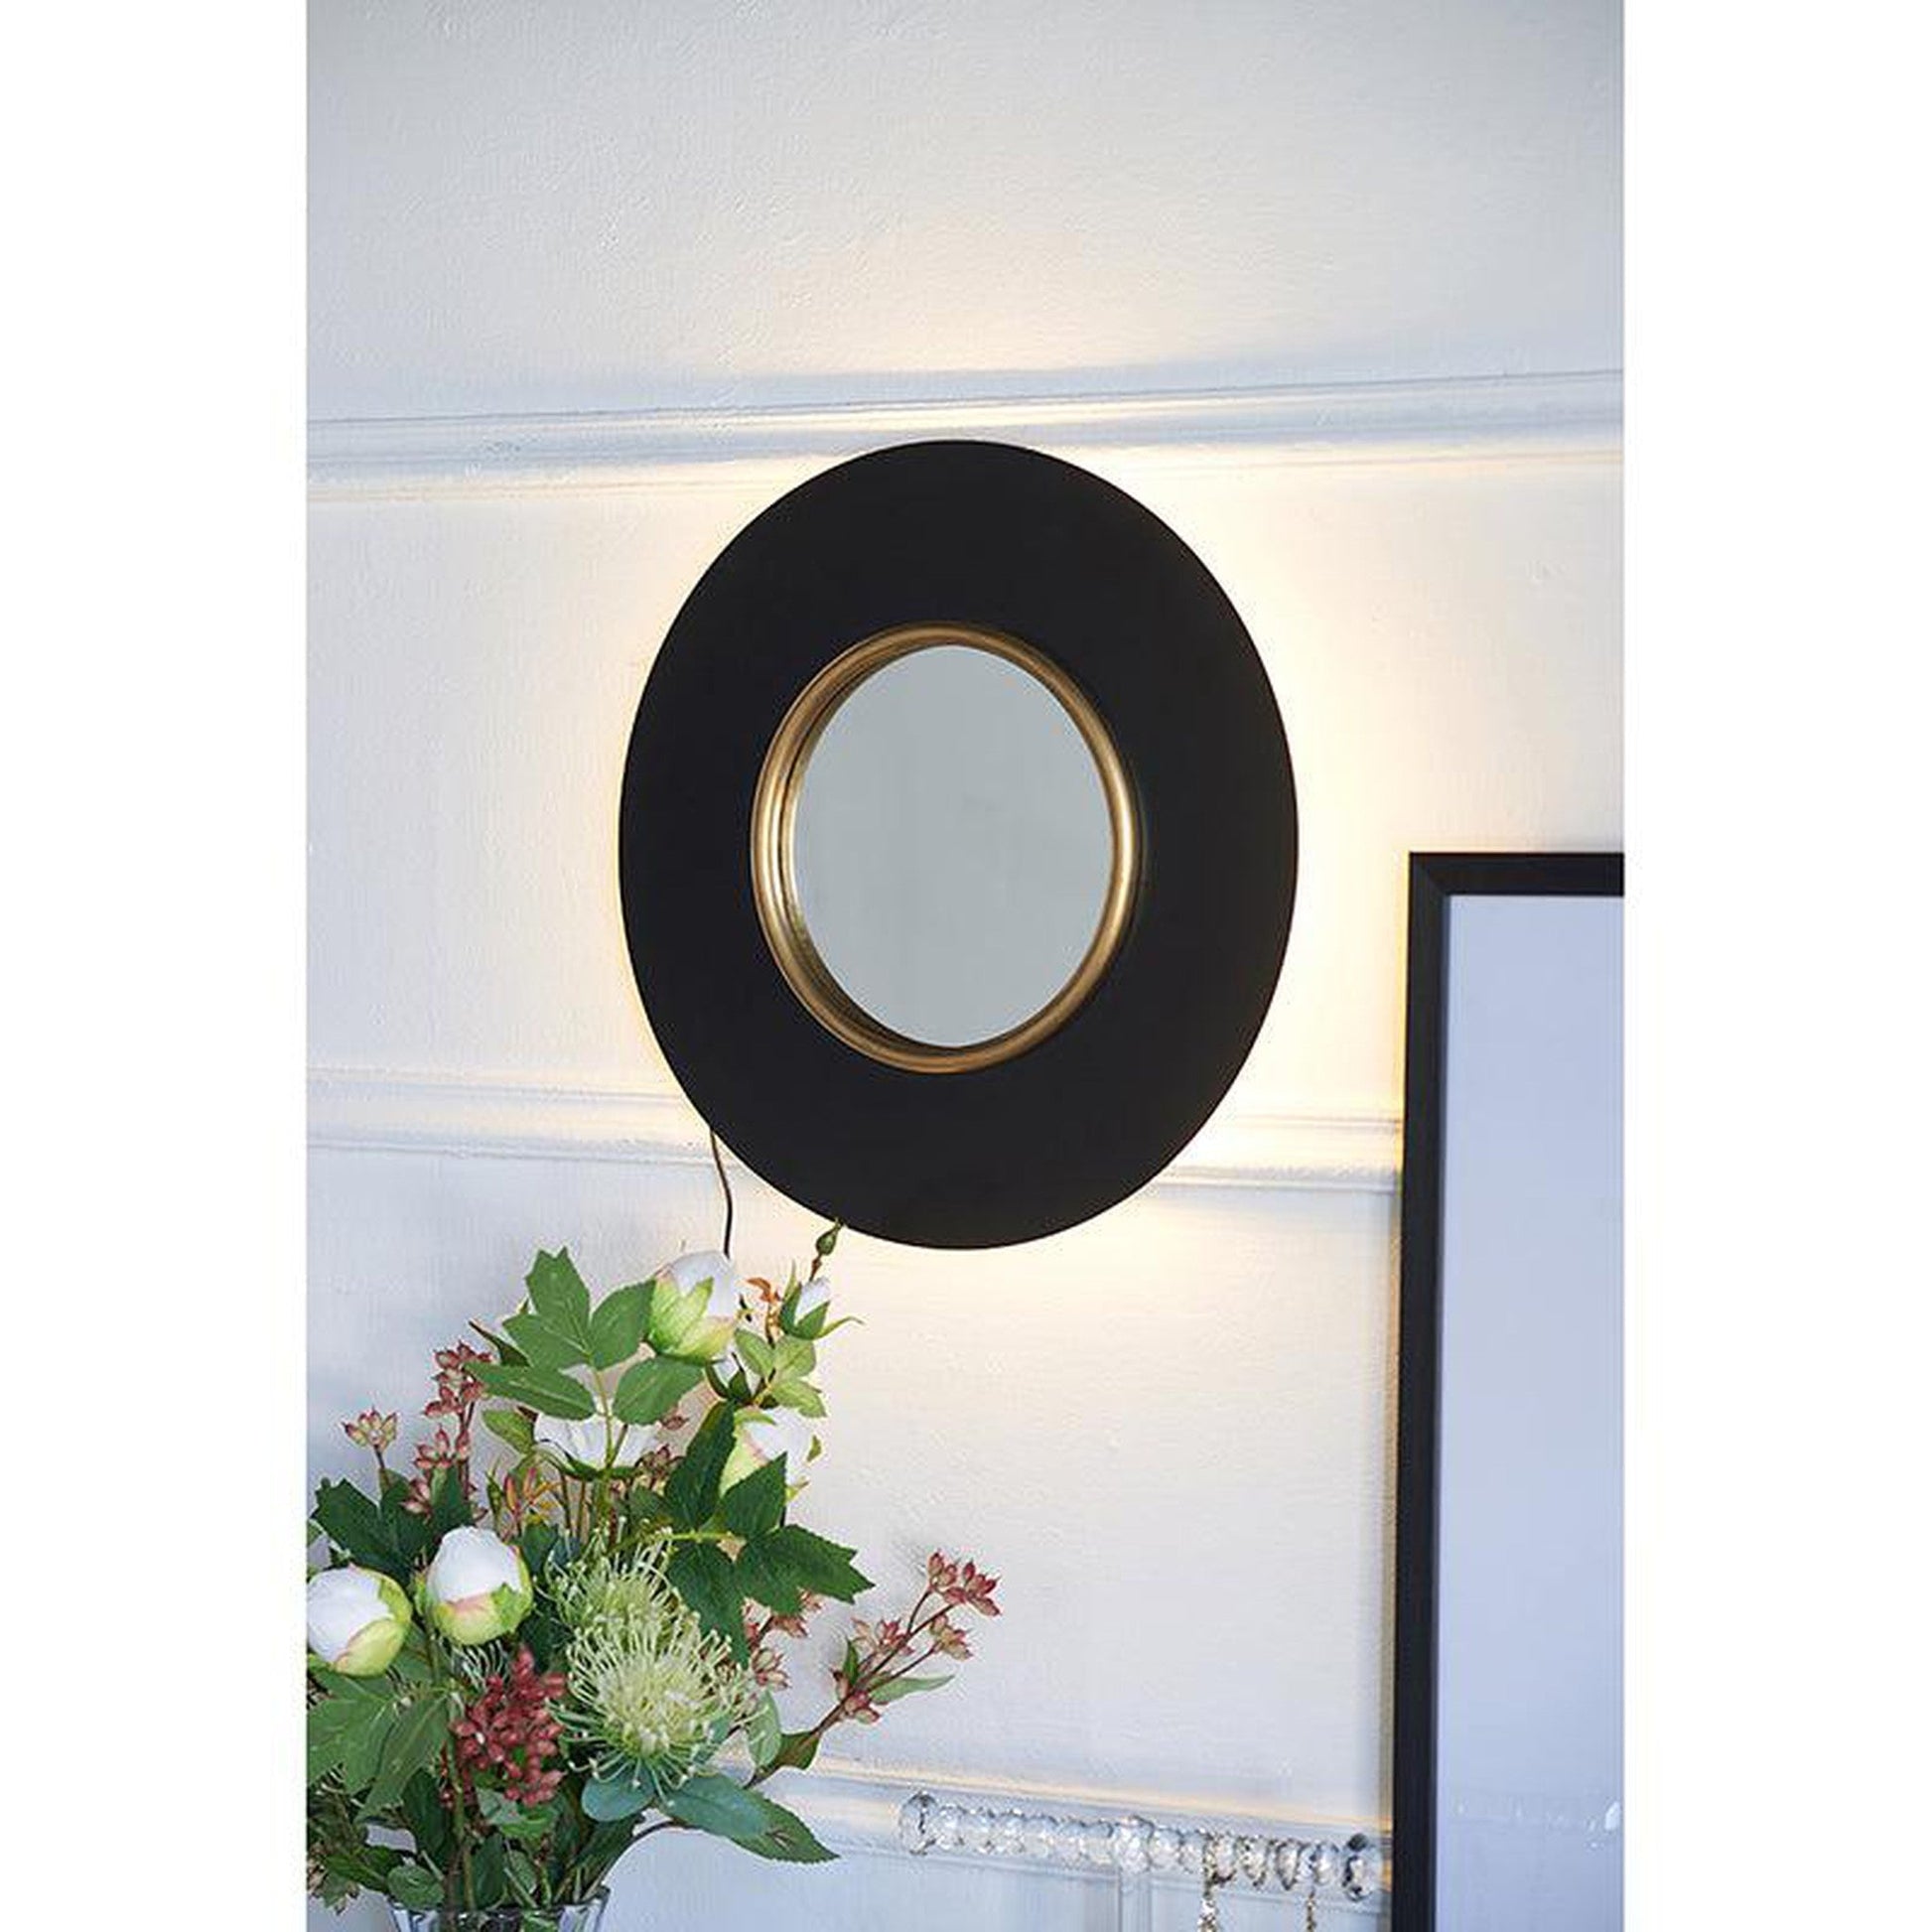 A&B Home 16" x 16" Bundle of 19 Round Black and Gold Metal Frame Wall-Mounted Mirror With Led Light